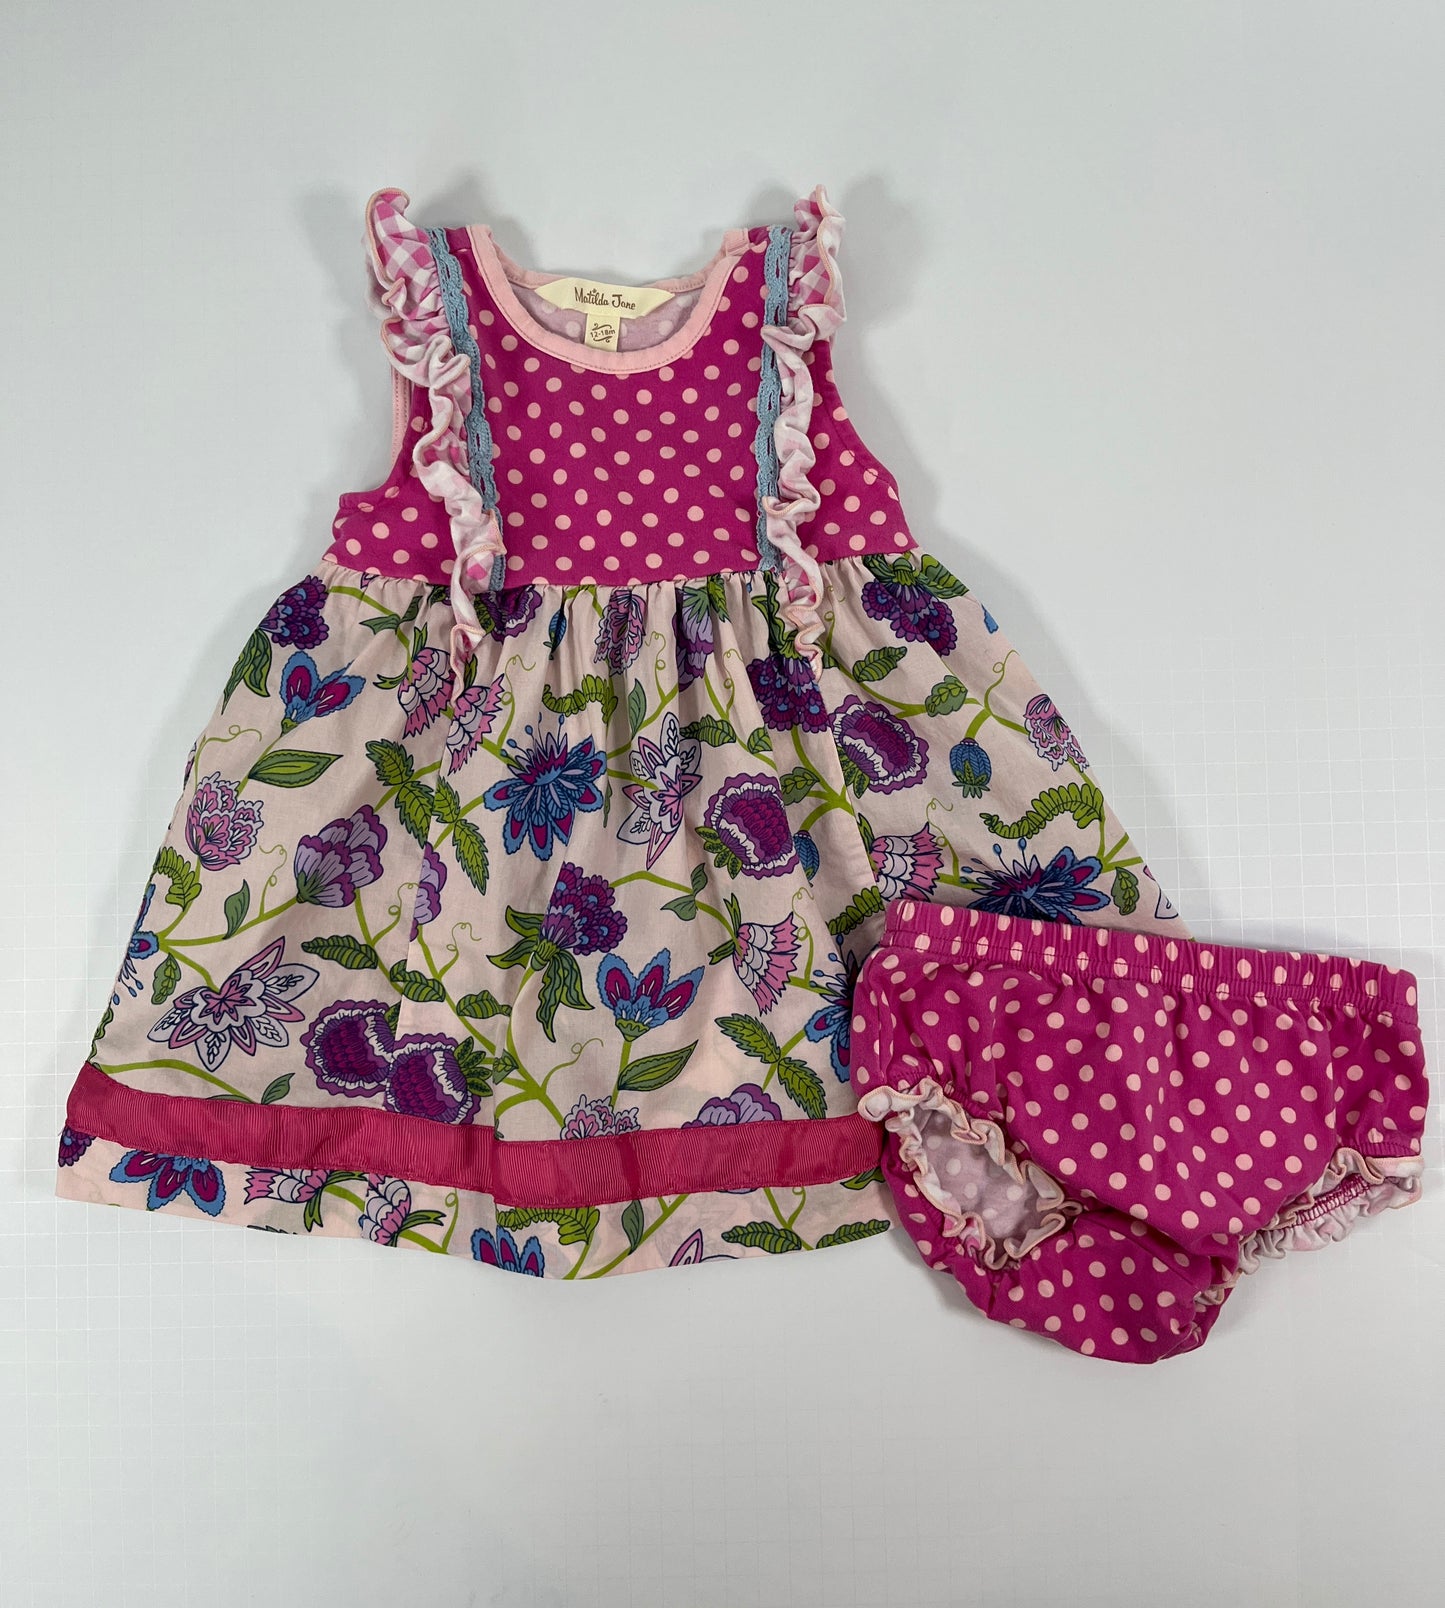 PPU 45242 Matilda Jane 12-18m floral dress with bloomers